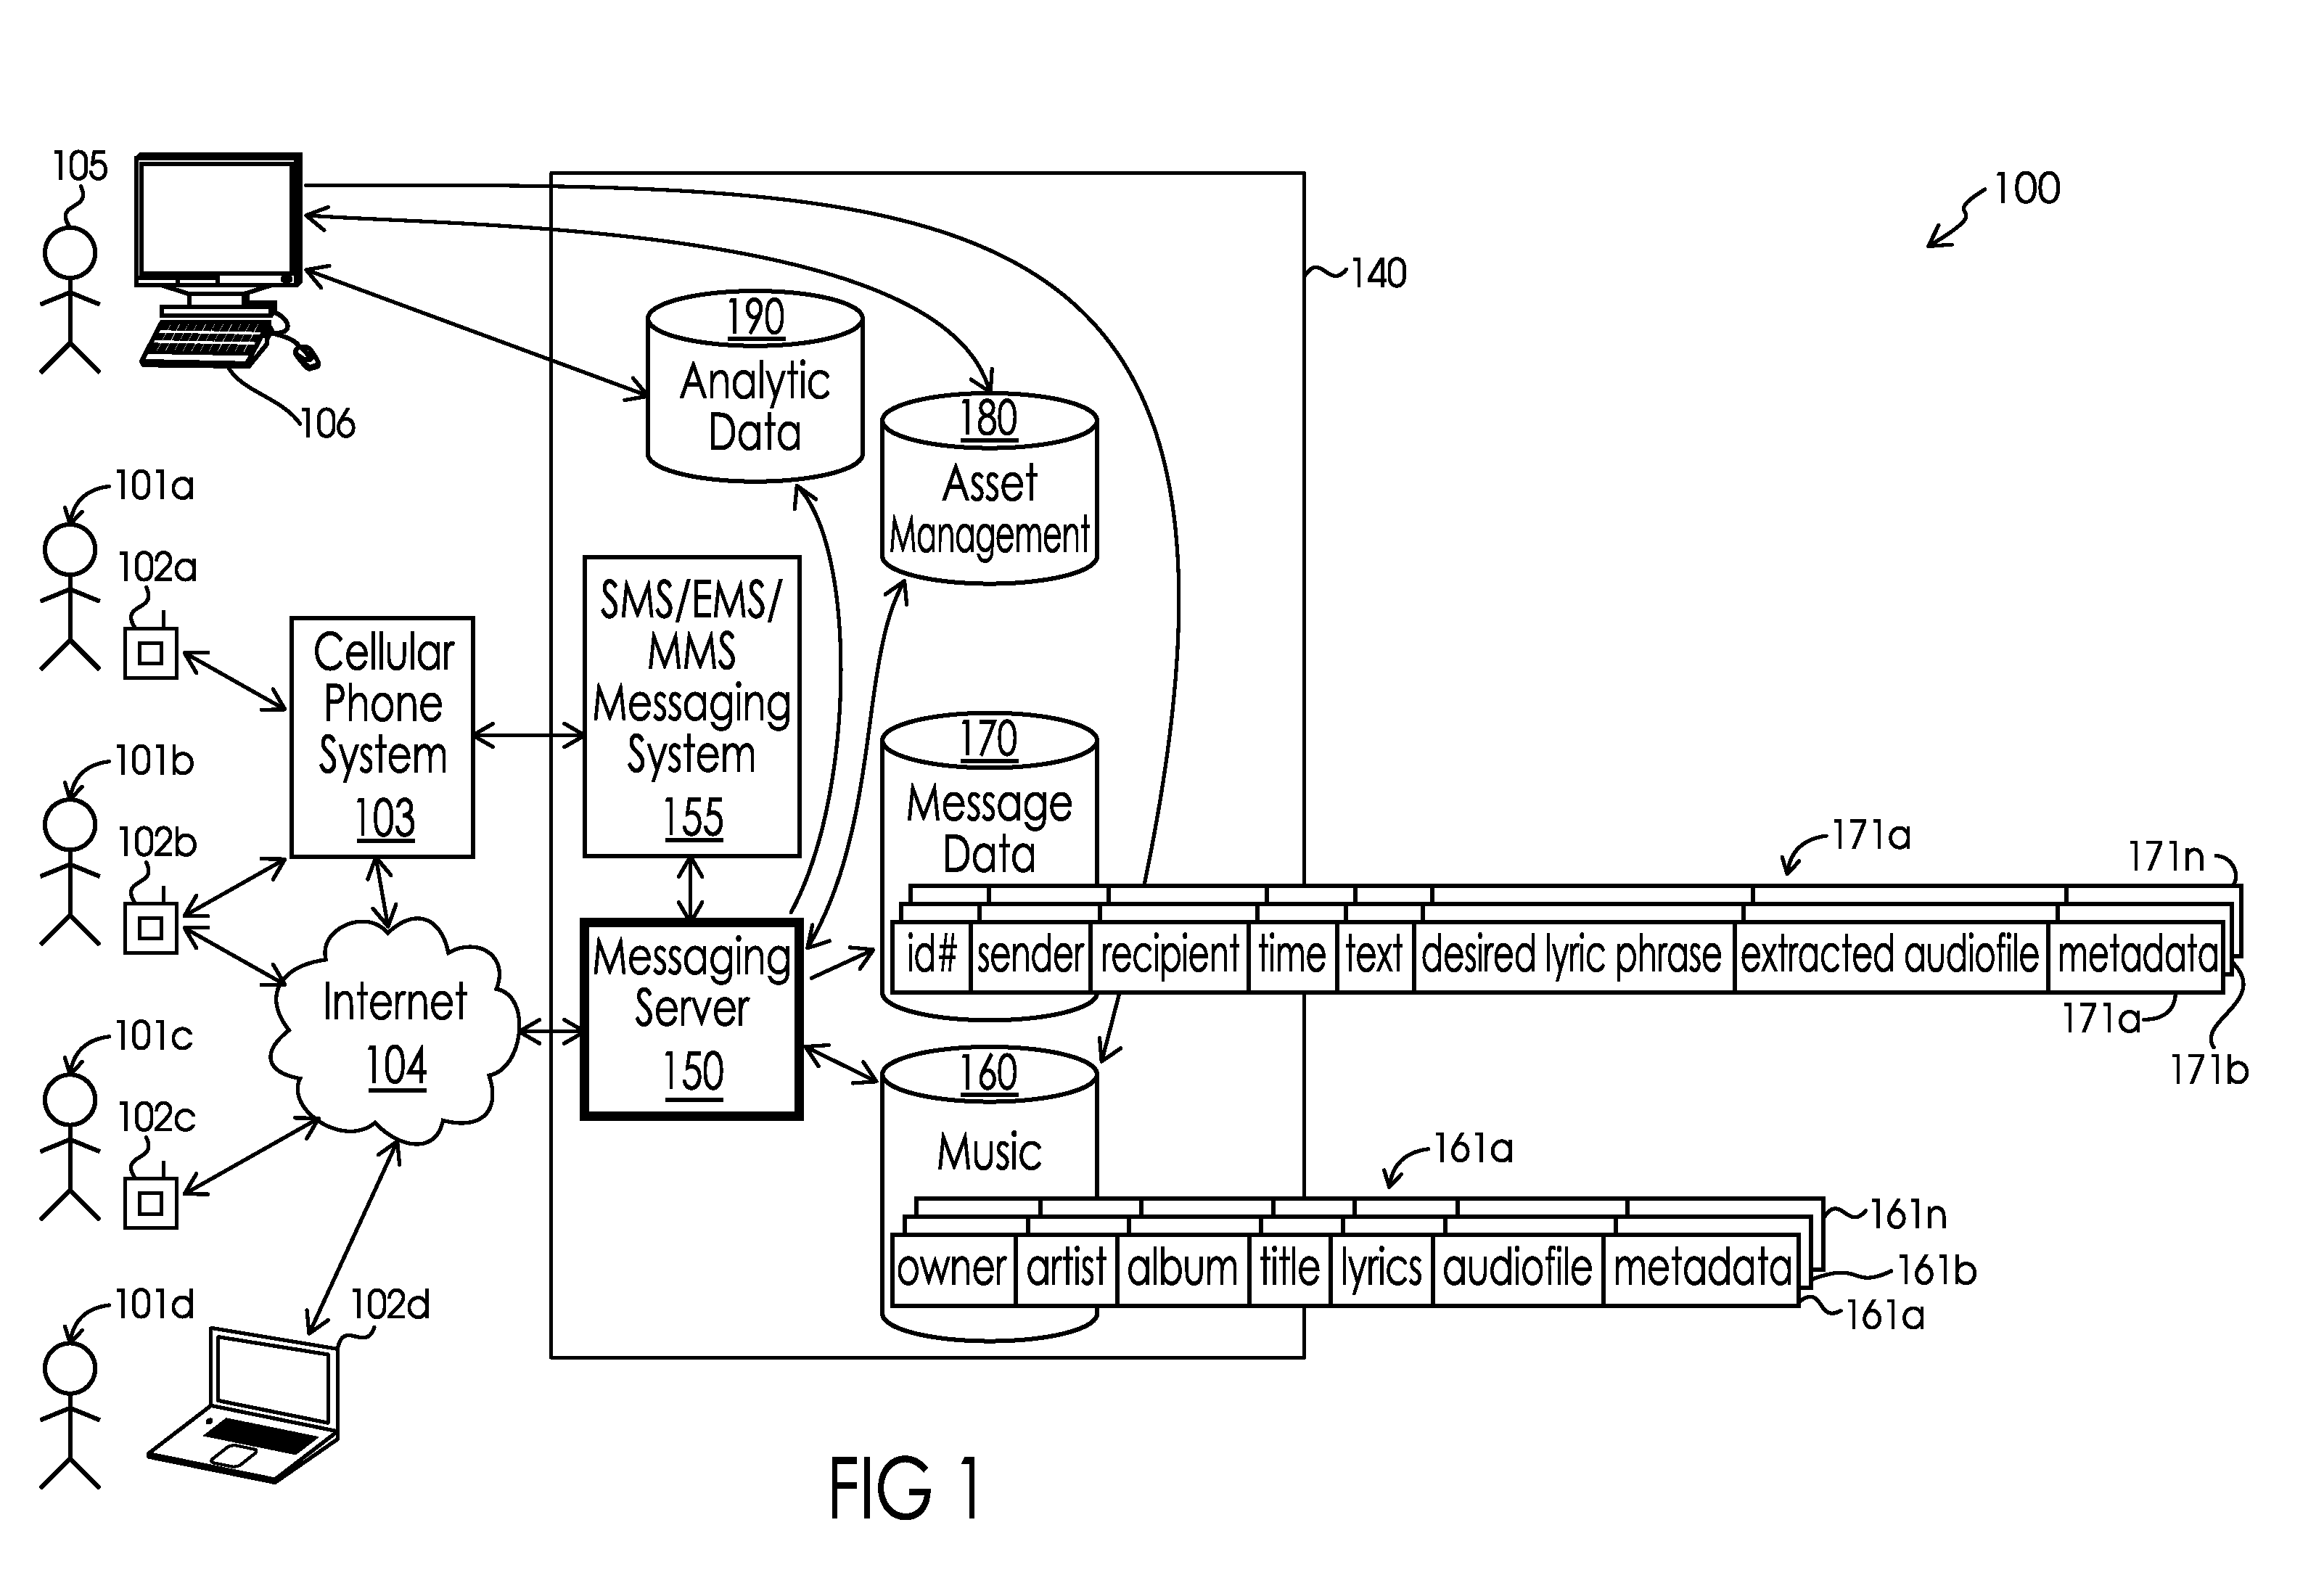 Method and System for Communicating Between a Sender and a Recipient Via a Personalized Message Including an Audio Clip Extracted from a Pre-Existing Recording